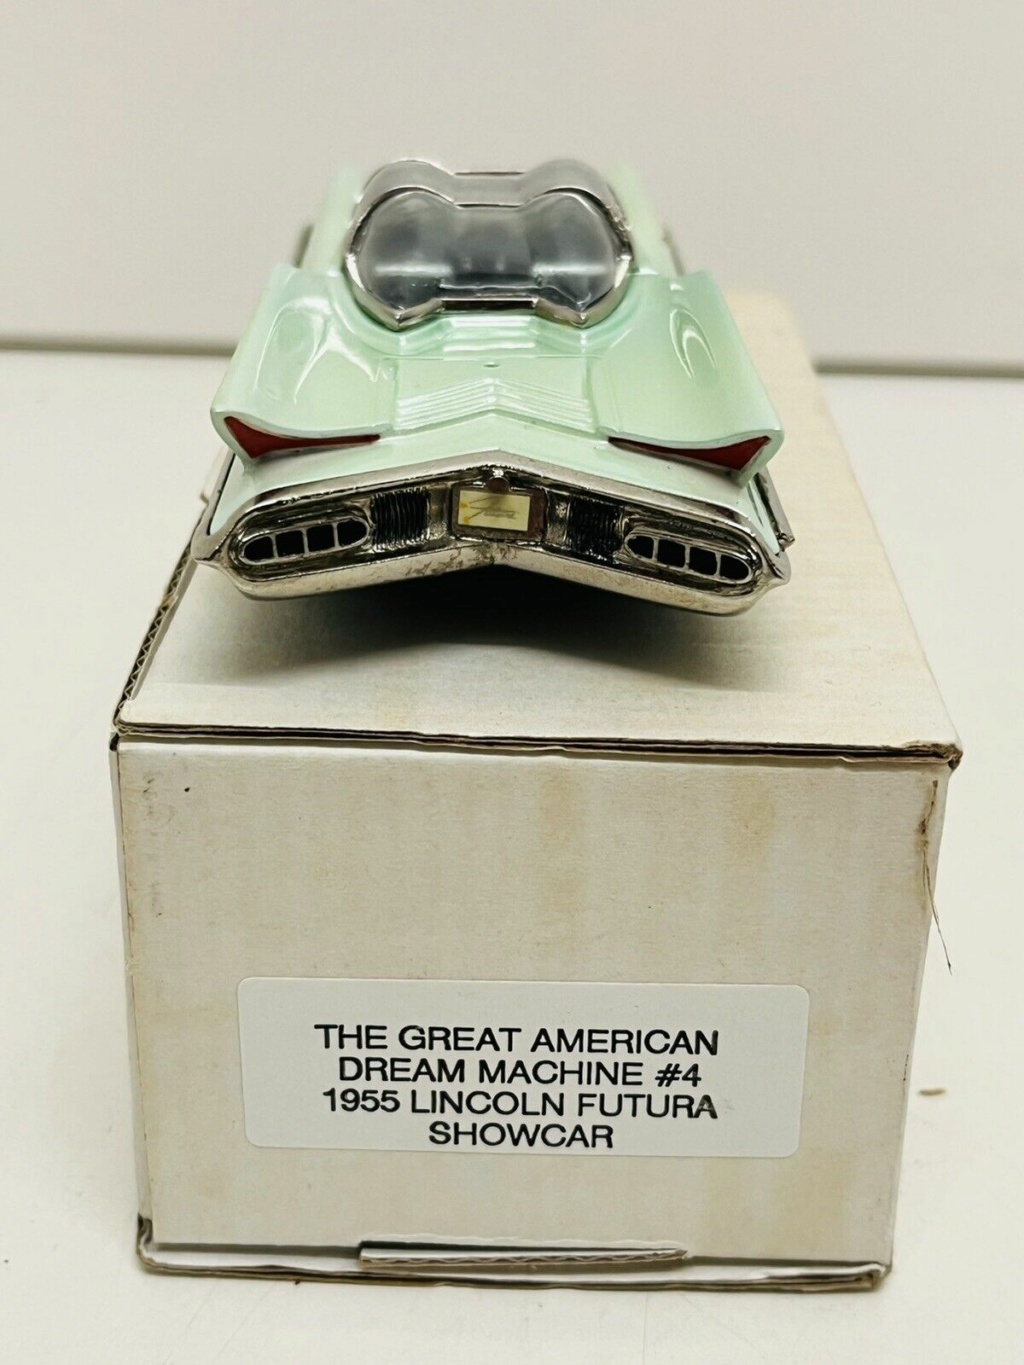 THE GREAT AMERICAN DREAM MACHINE - 1/43 diecast 50s concept car - made in England S-l16259